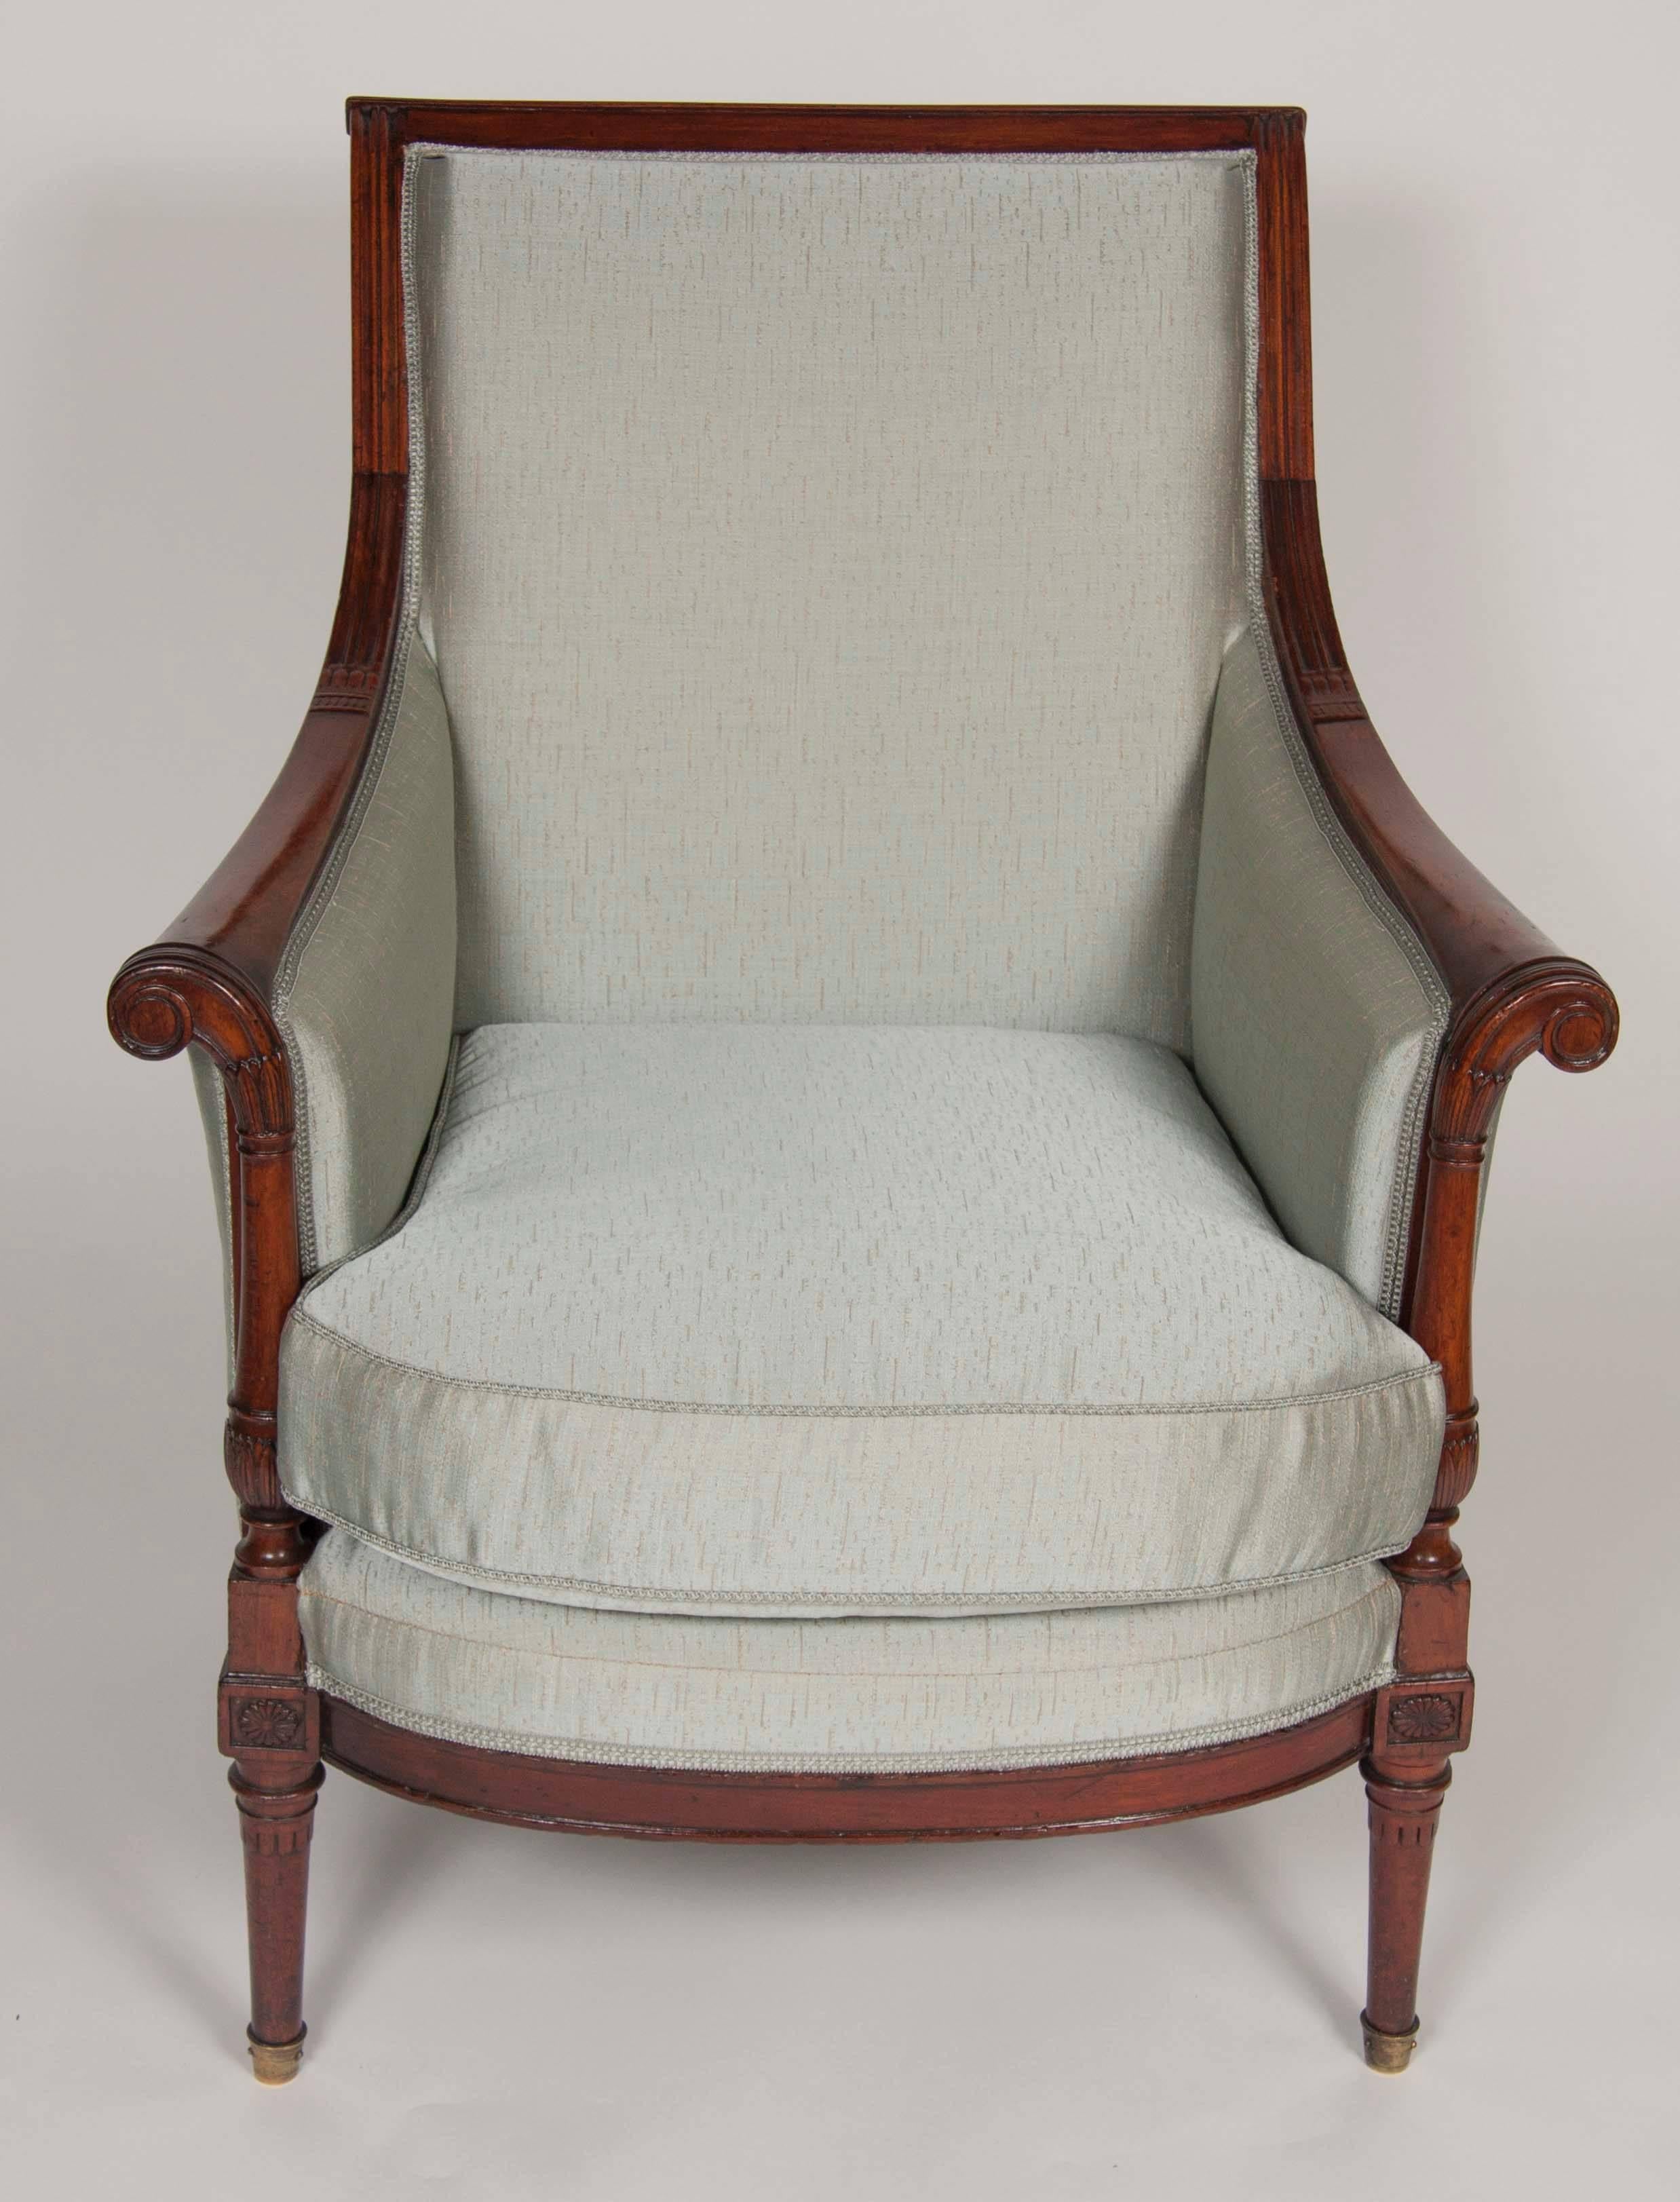 A fine French Directoire mahogany bergere from the estate of George Gravert.